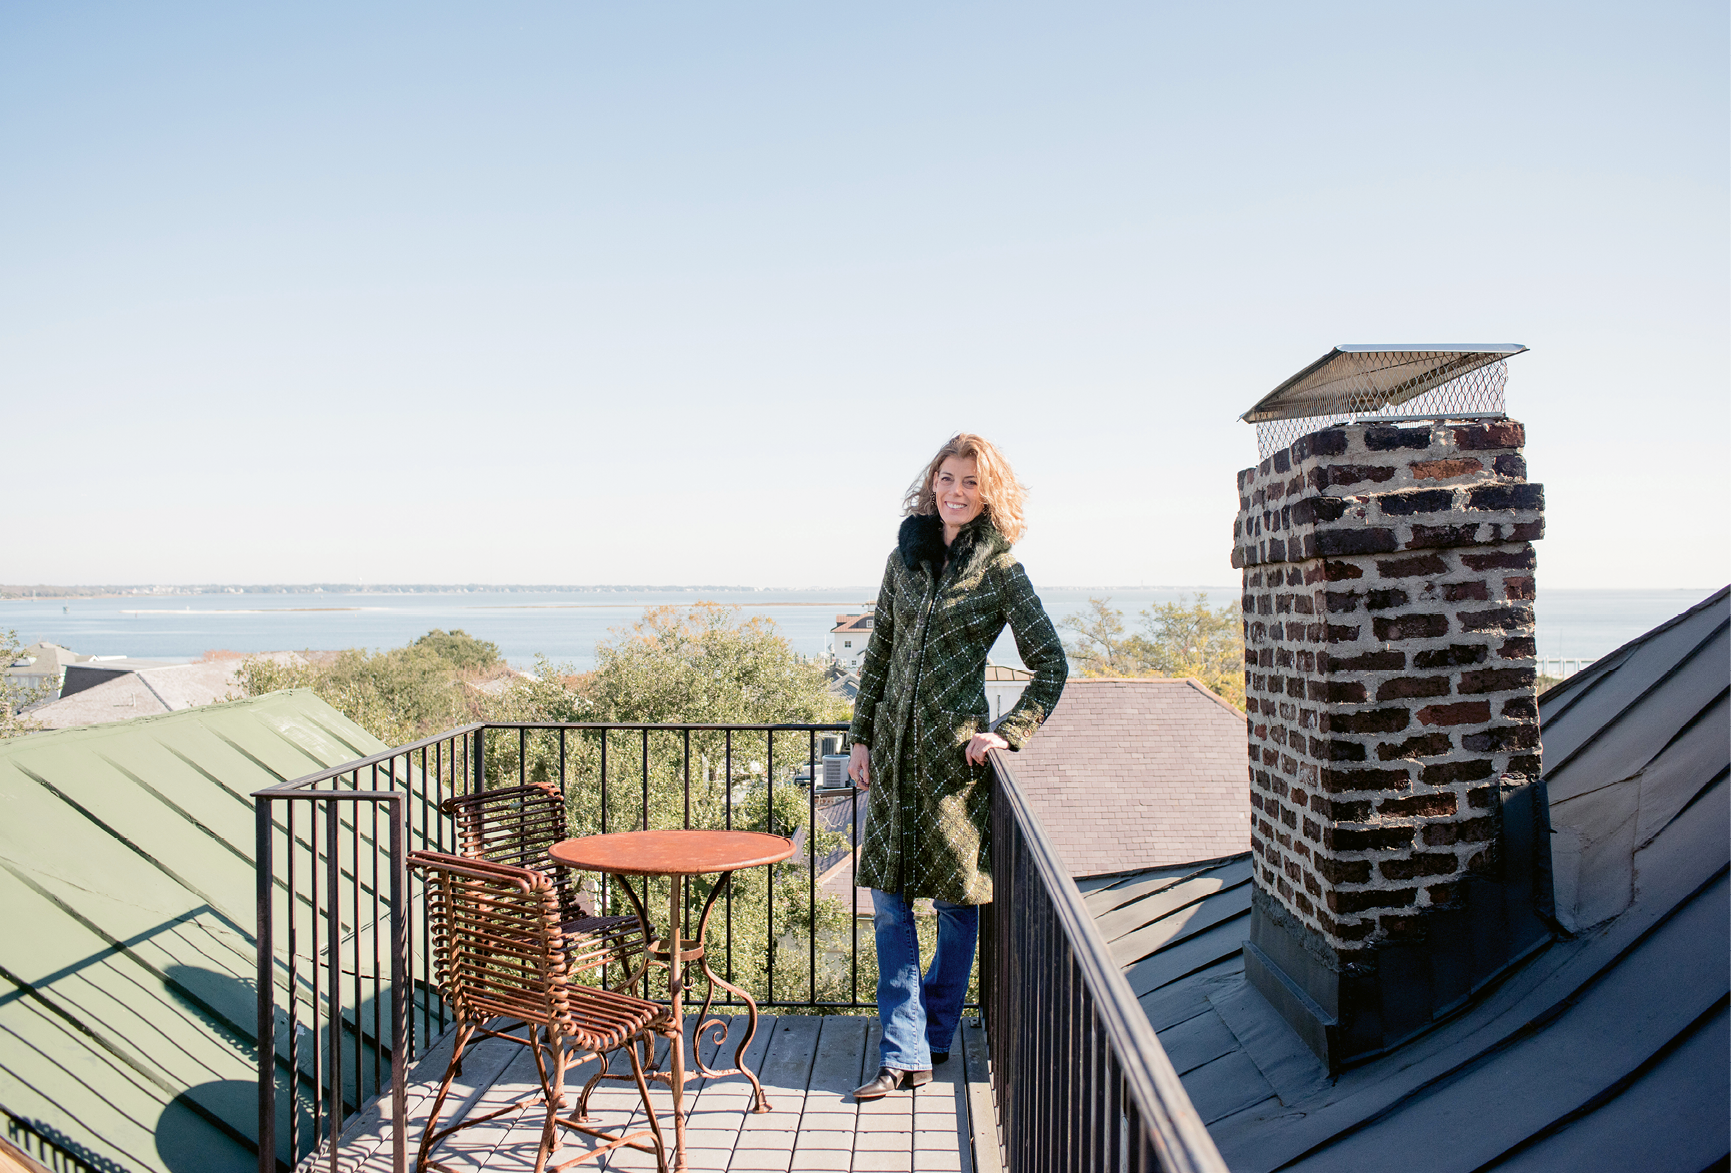 THE LONG VIEW: Pollak takes in some fresh air from her four-story home’s petite rooftop deck, which offers stunning views of Charleston Harbor and Fort Sumter.